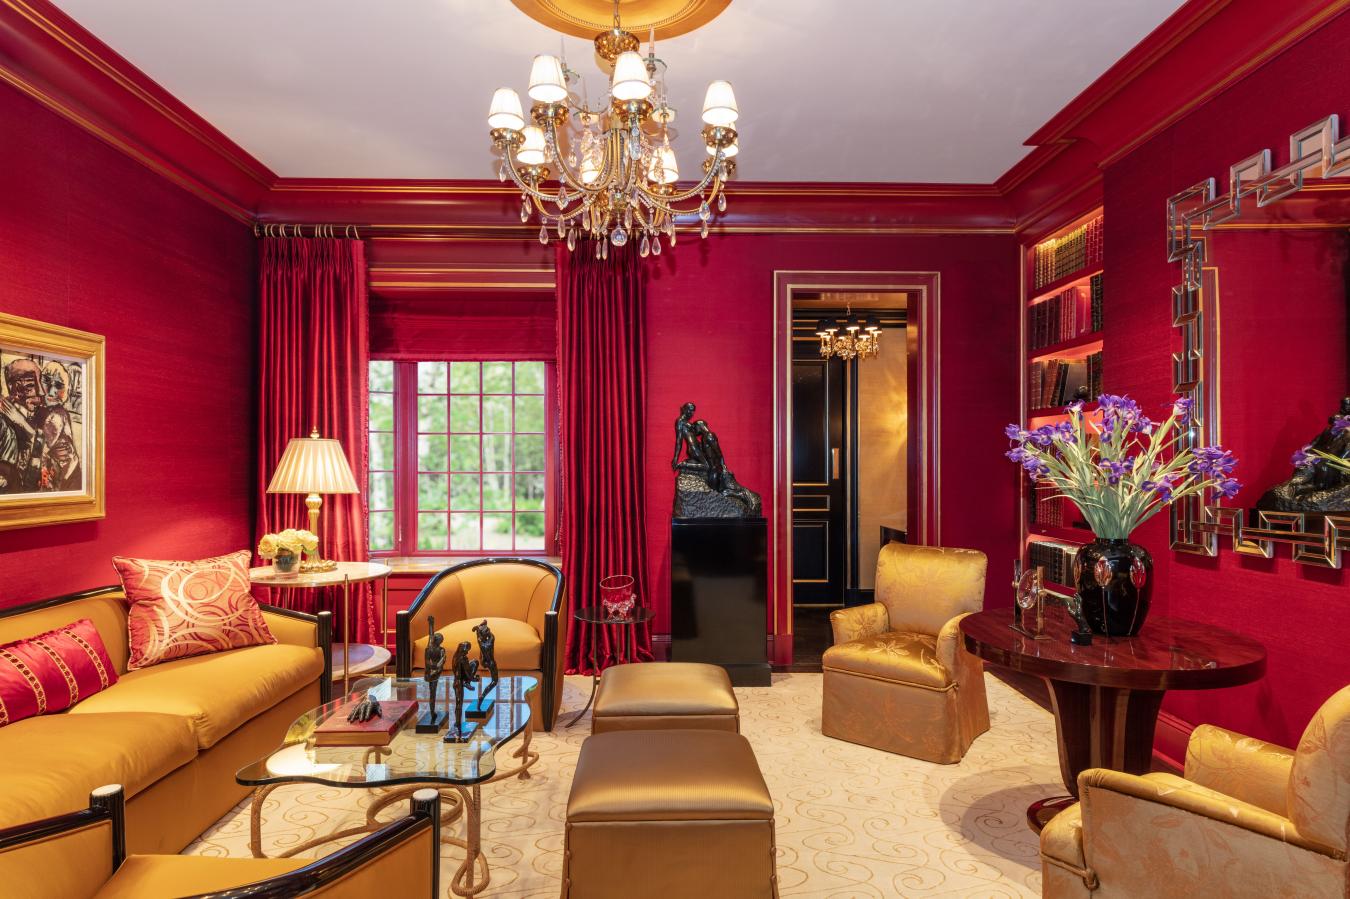 11 EAST 74TH STREET, New York, New York, 10021, United States, 6 Bedrooms Bedrooms, ,9 BathroomsBathrooms,Residential,For Sale,11 EAST 74TH STREET,1454951